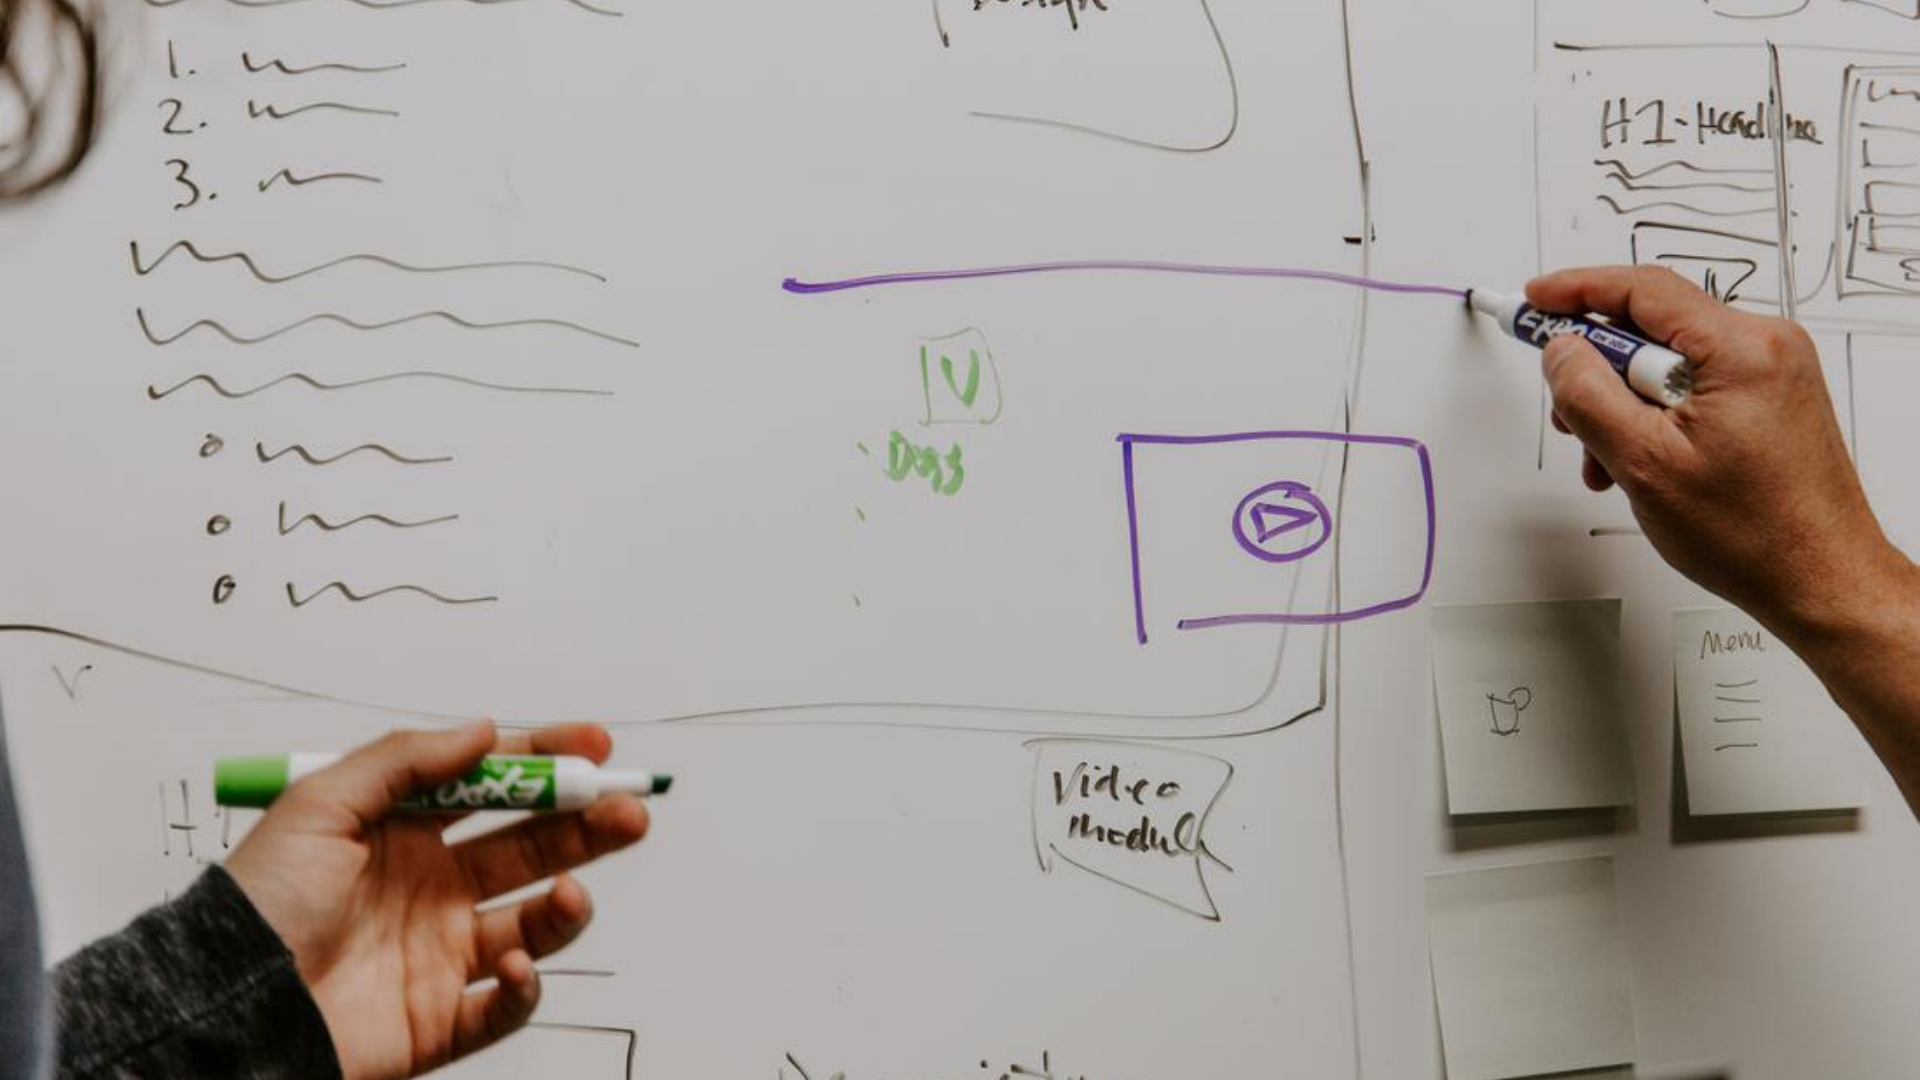 Two hands draw a strategy on a whiteboard